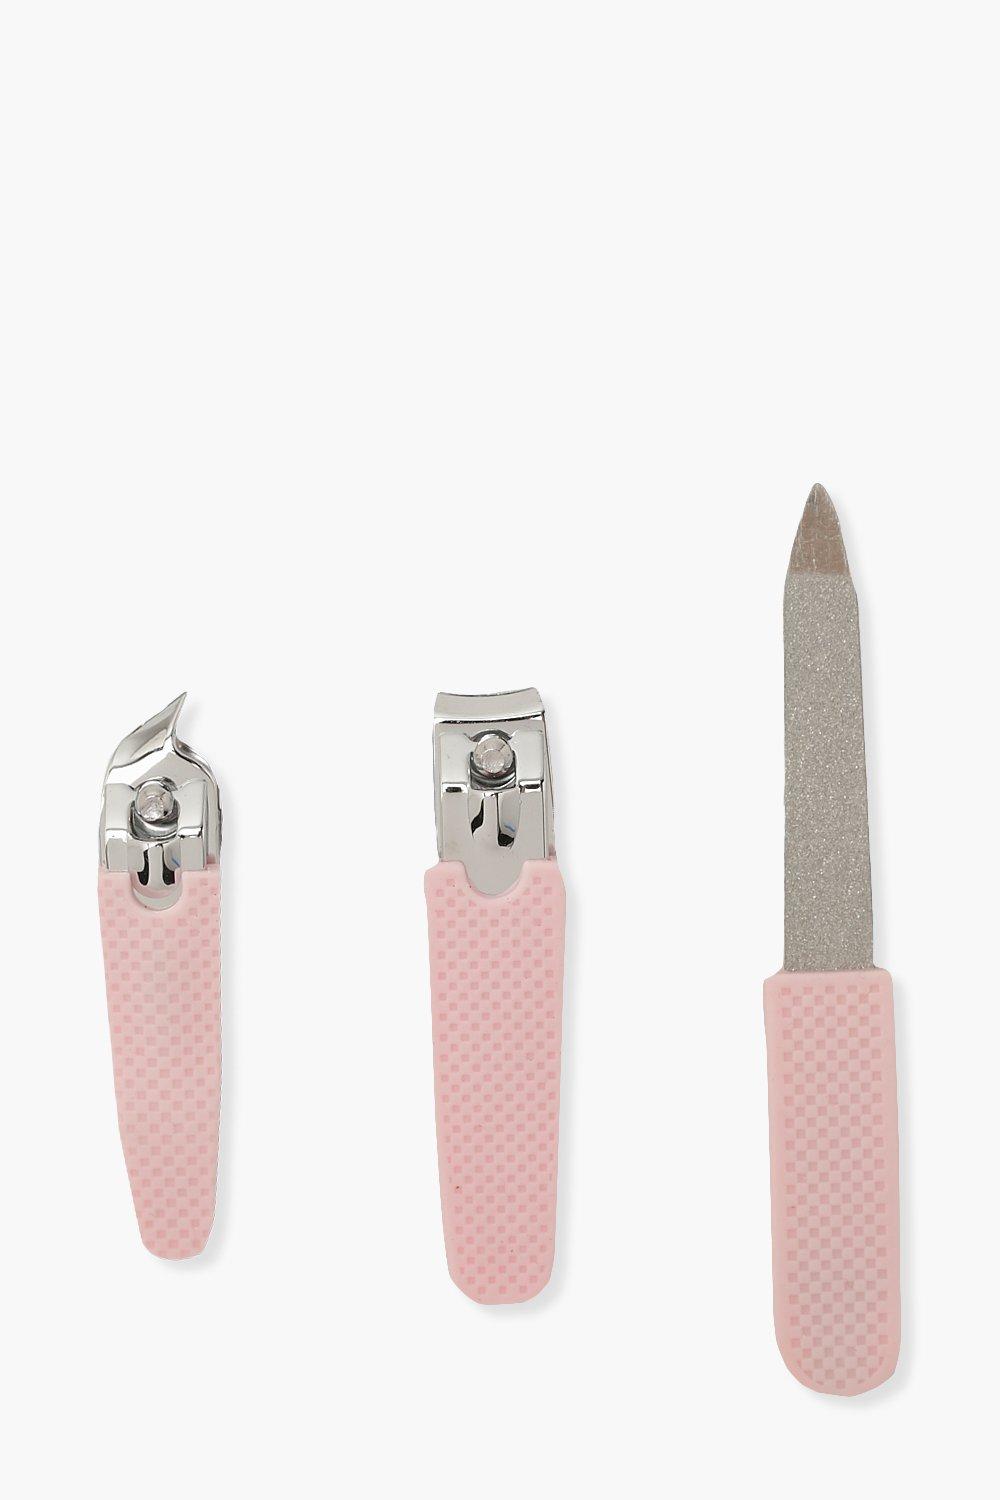 Womens Nail Tool Set - Pink - One Size, Pink